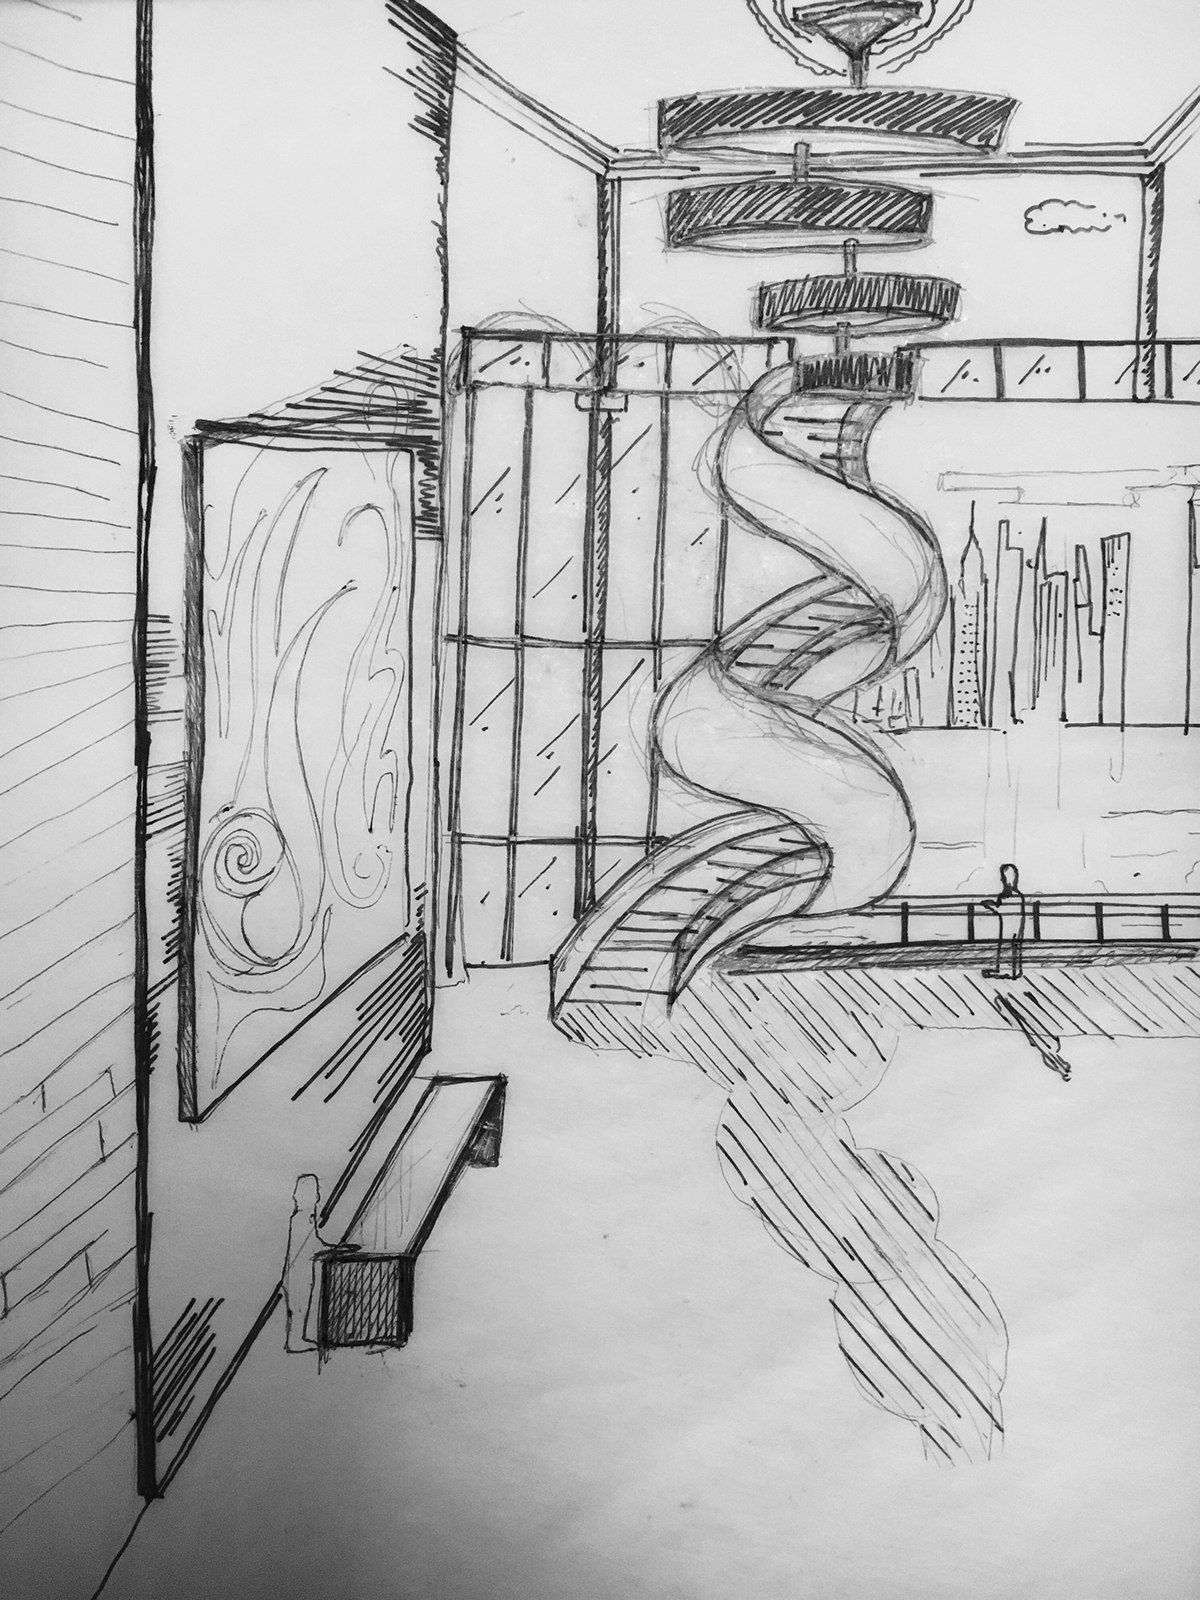 Interior Outline Sketch Drawing Perspective Of Reception Stock Illustration  - Download Image Now - iStock